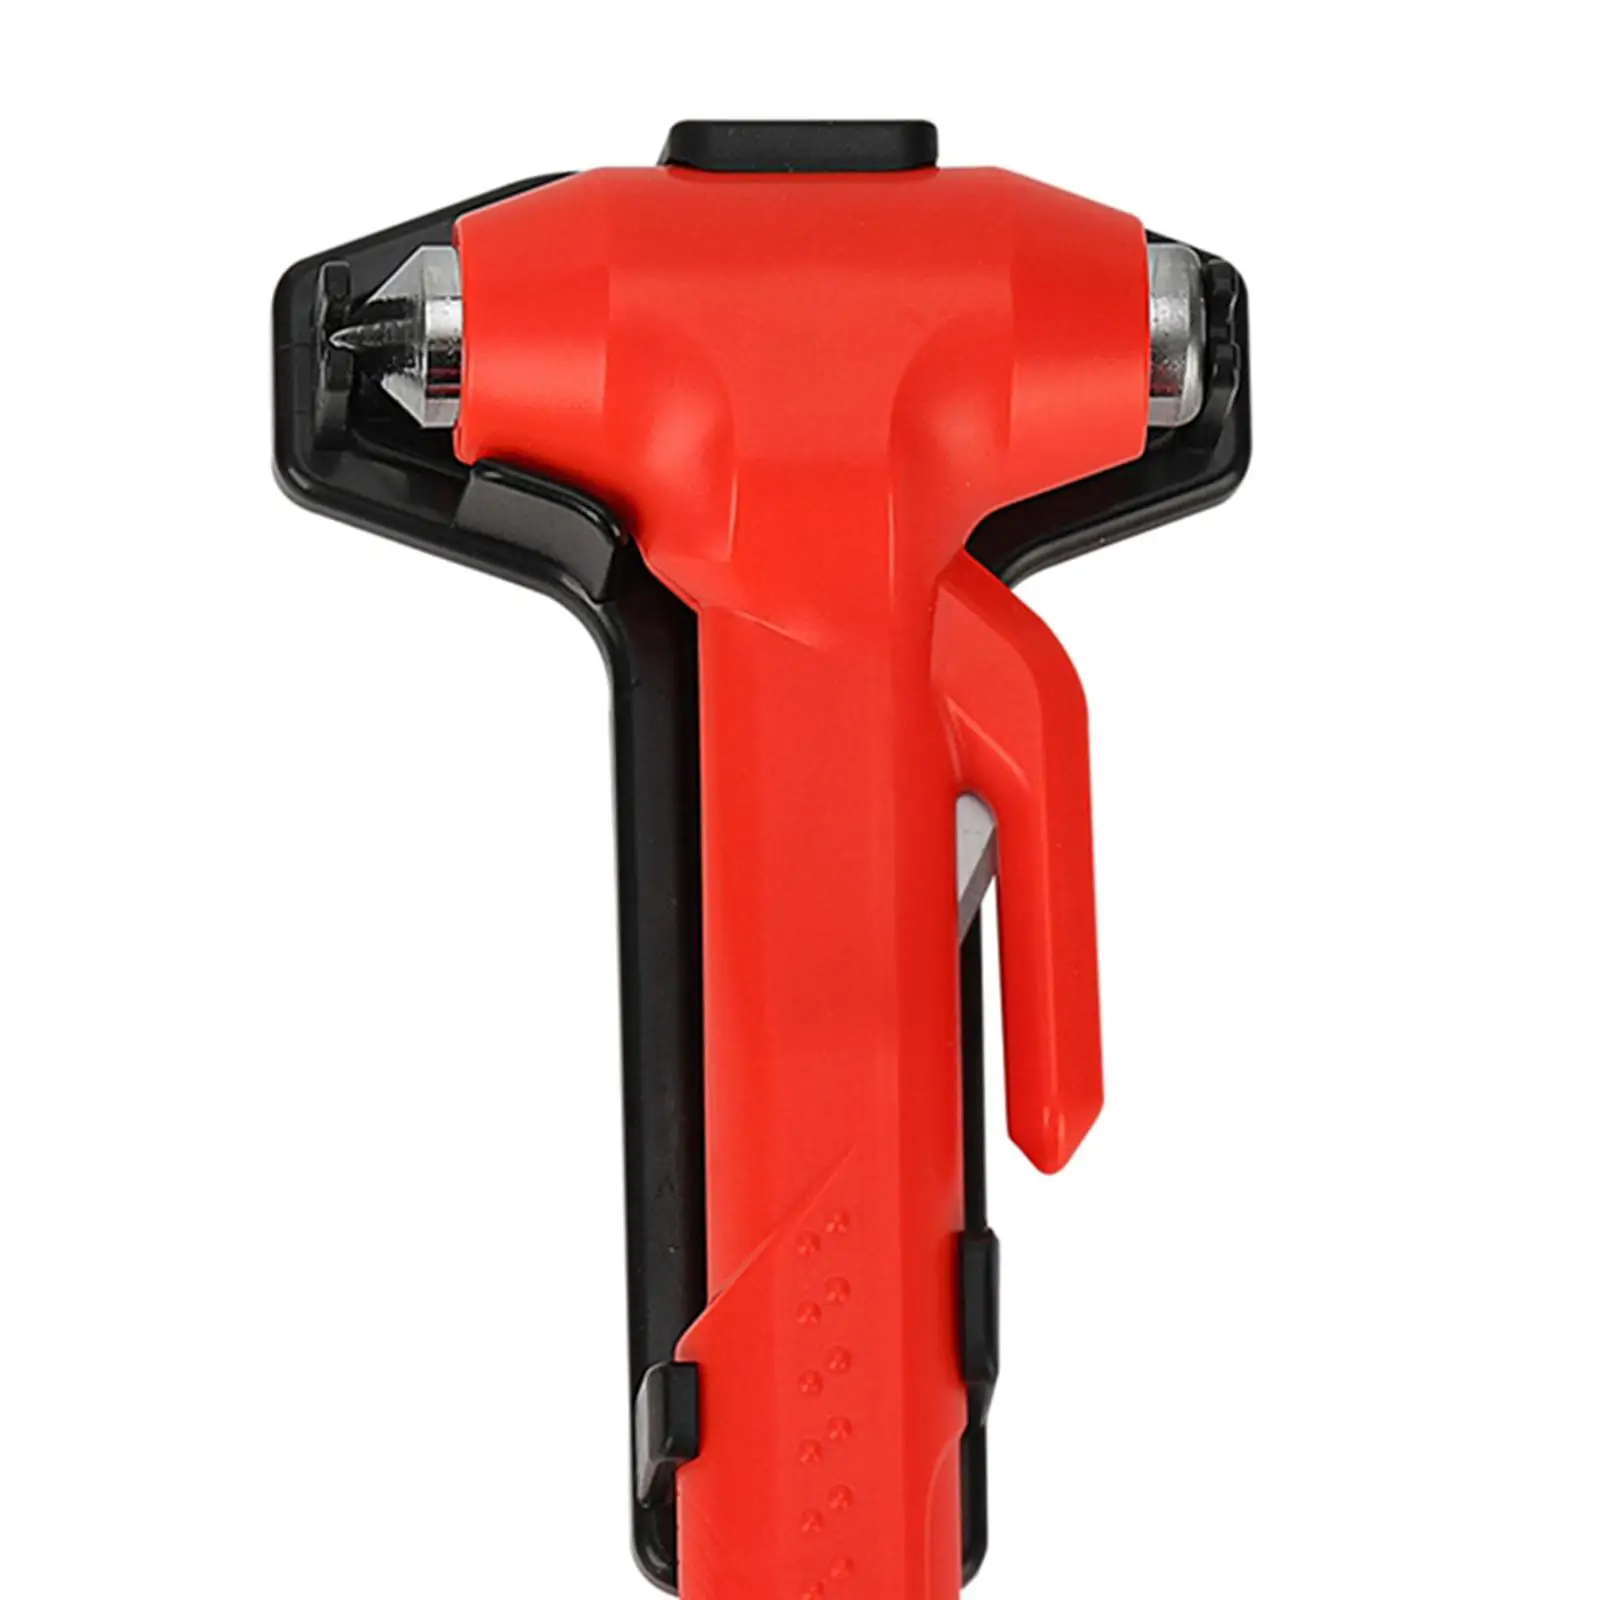 Car Safety Hammer Tool Multifunctional with Bracket Assist Accessories Seat Belt Cutter for Card Vehicles Bus Trucks Red